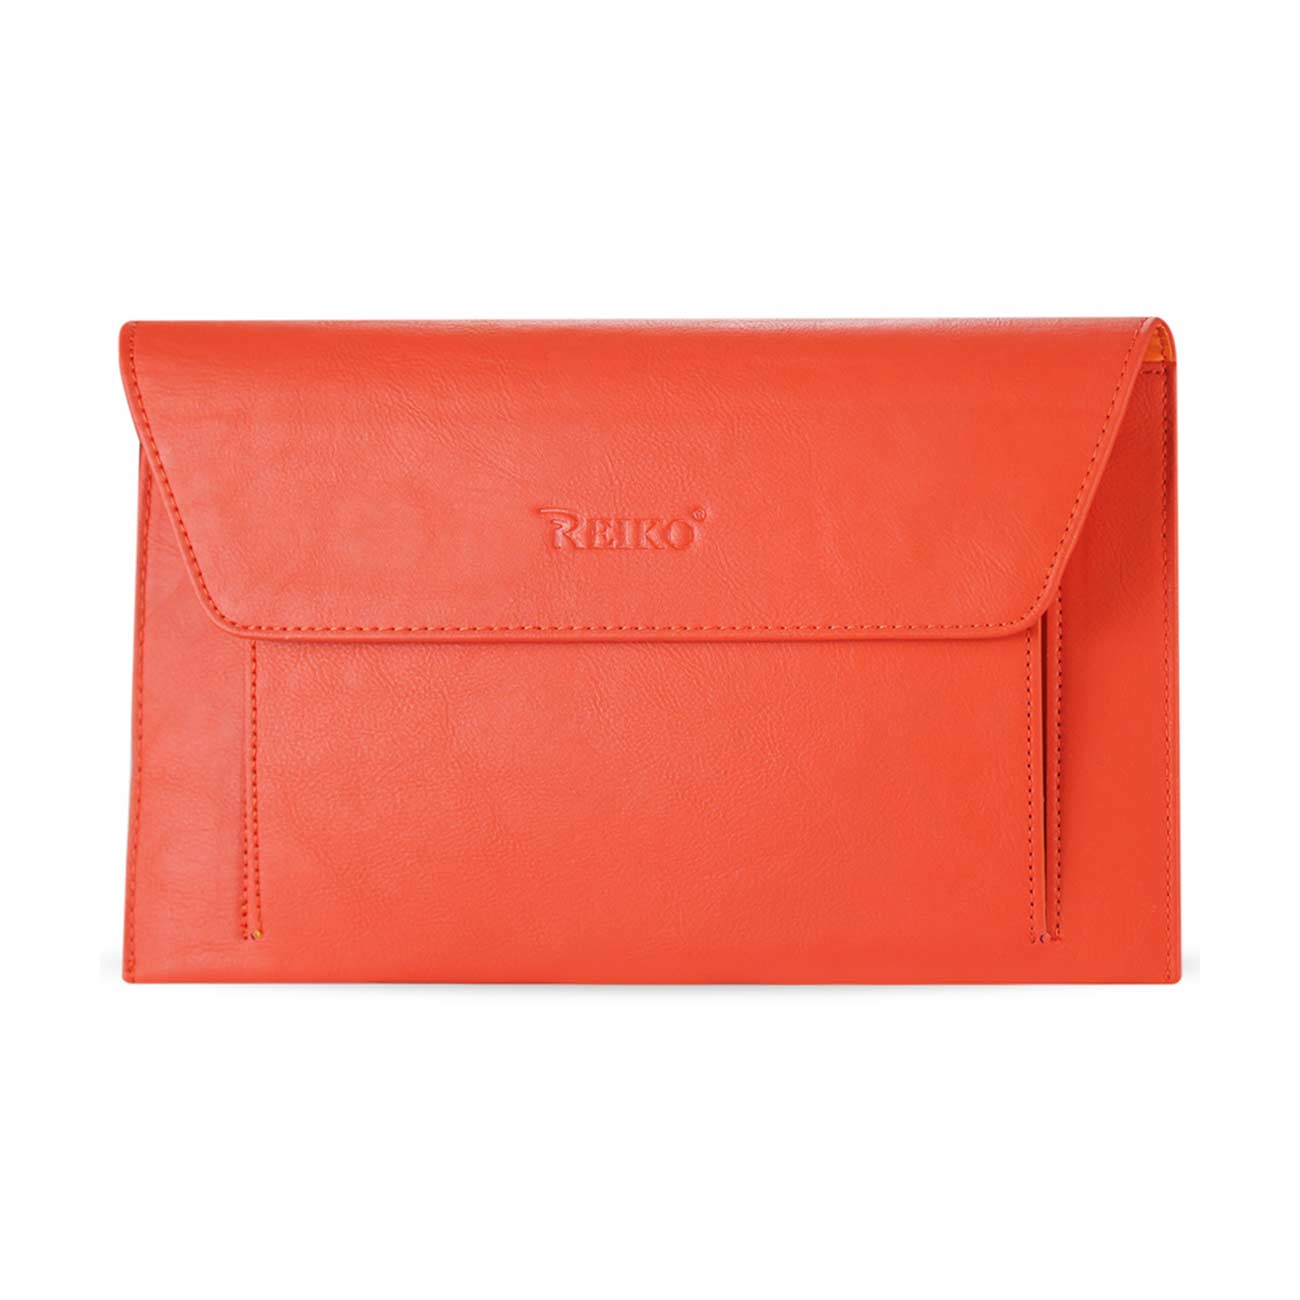 REIKO PREMIUM LEATHER CASE POUCH FOR 11.6INCHES IPADS AND TABLETS In ORANGE